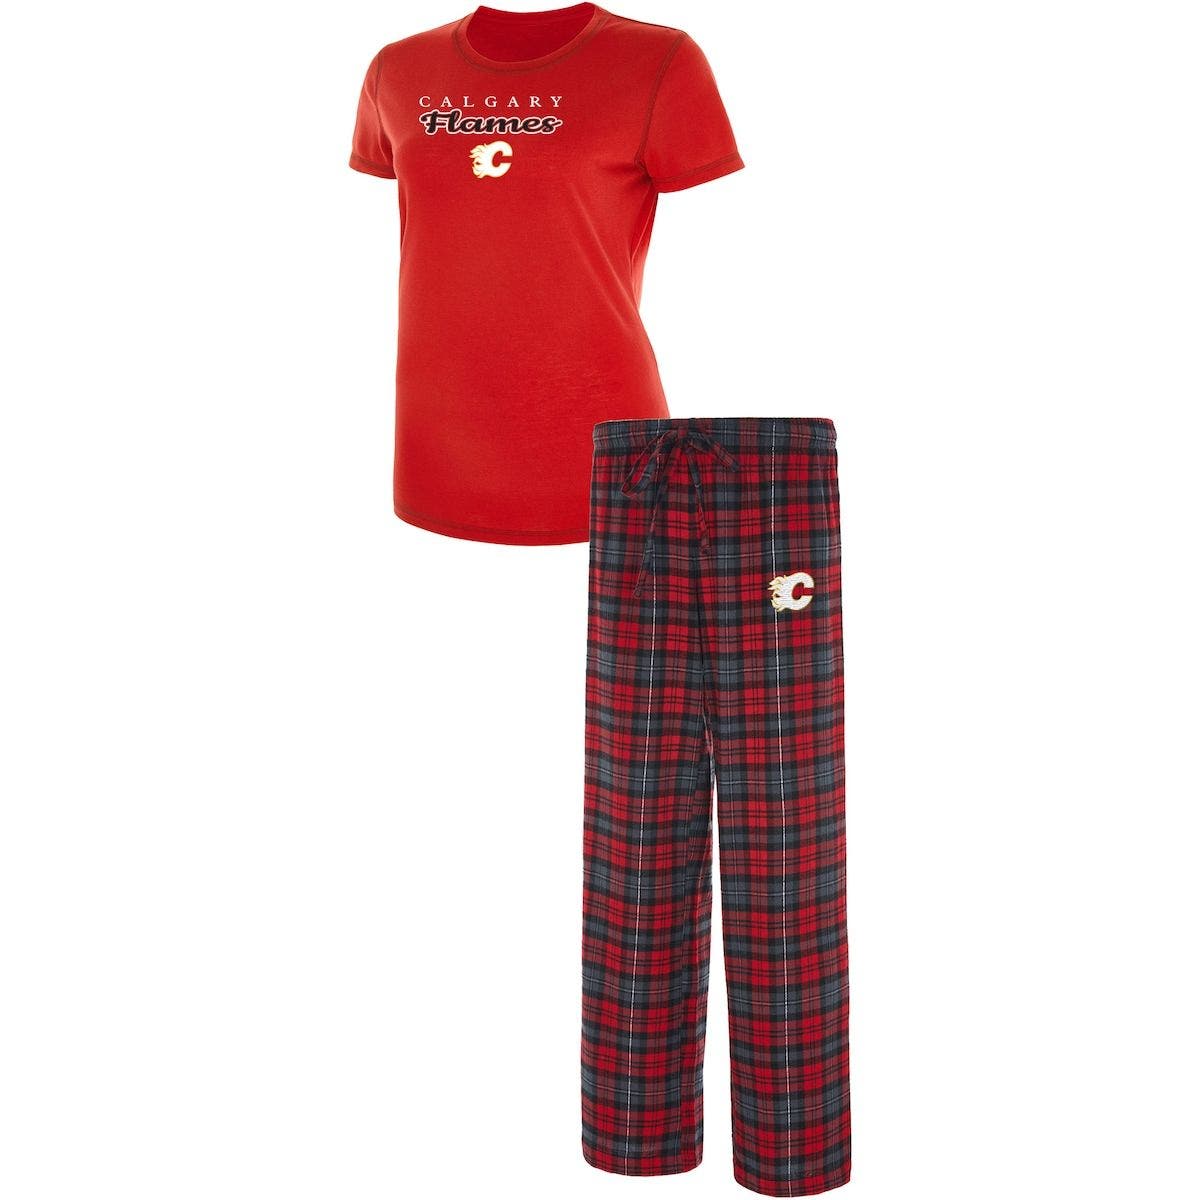 Texas Tech Red Raiders Womens Scatter Pattern Floral Pajama Lounge Pants